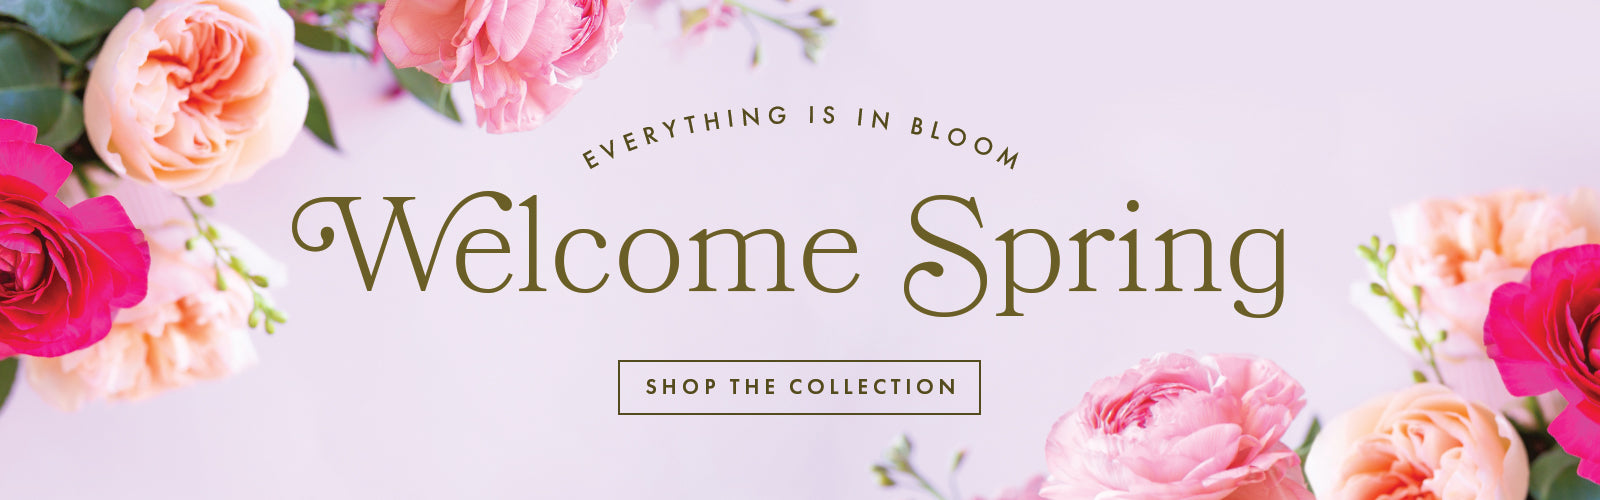 everything is in bloom. welcome spring. shop the collection. pink flowers lay on a lavender ground.